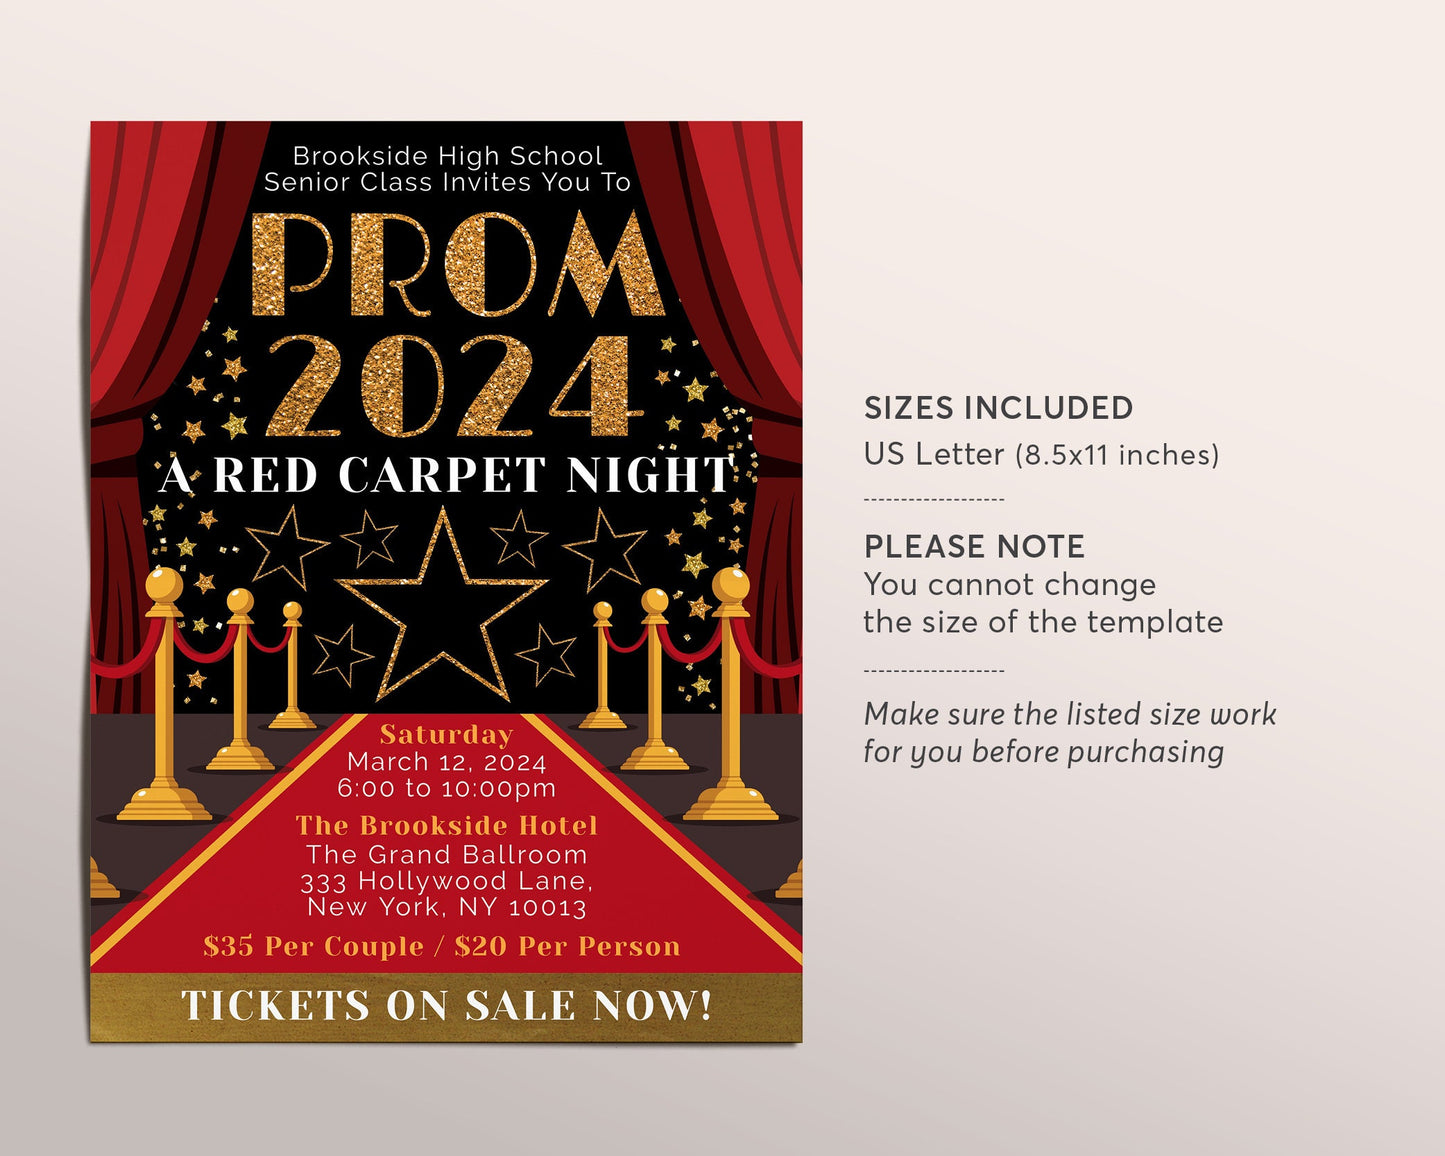 Red Carpet Prom Night Dance Flyer Editable Template, Junior Senior Prom Homecoming Hollywood VIP Access Invitation, Father Daughter Dance